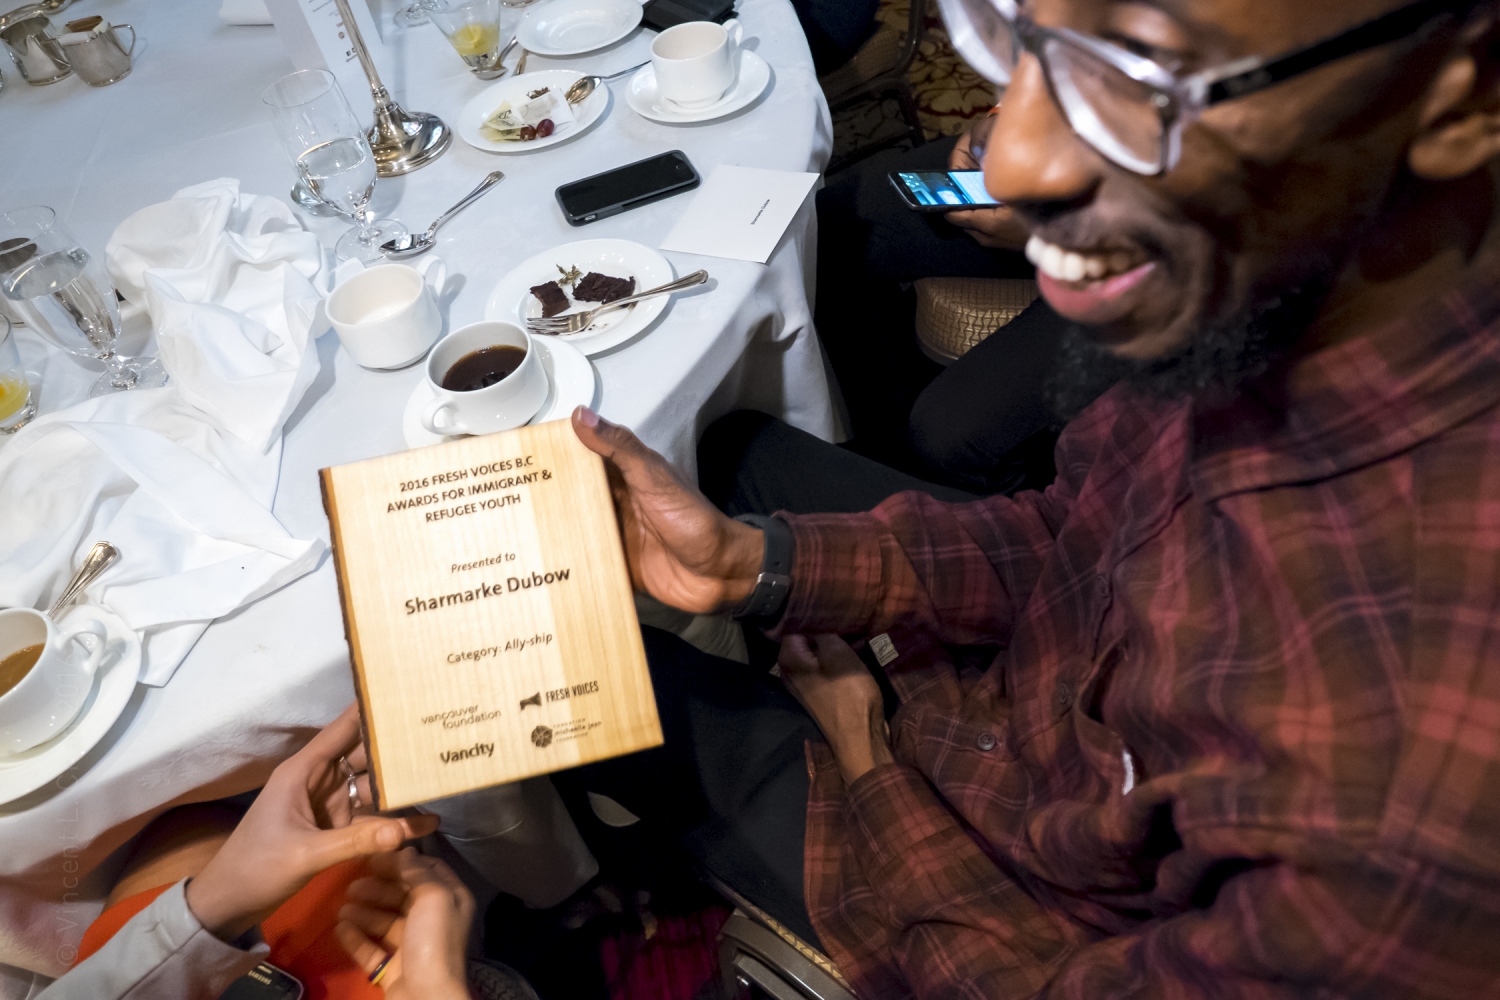 Smiling man sitting at a banquet table holding a wooden award plaque with words "2016 Fresh Voices B.C. Awards for Immigrant and Refugee Youth presented to Sharmarke Dubow"